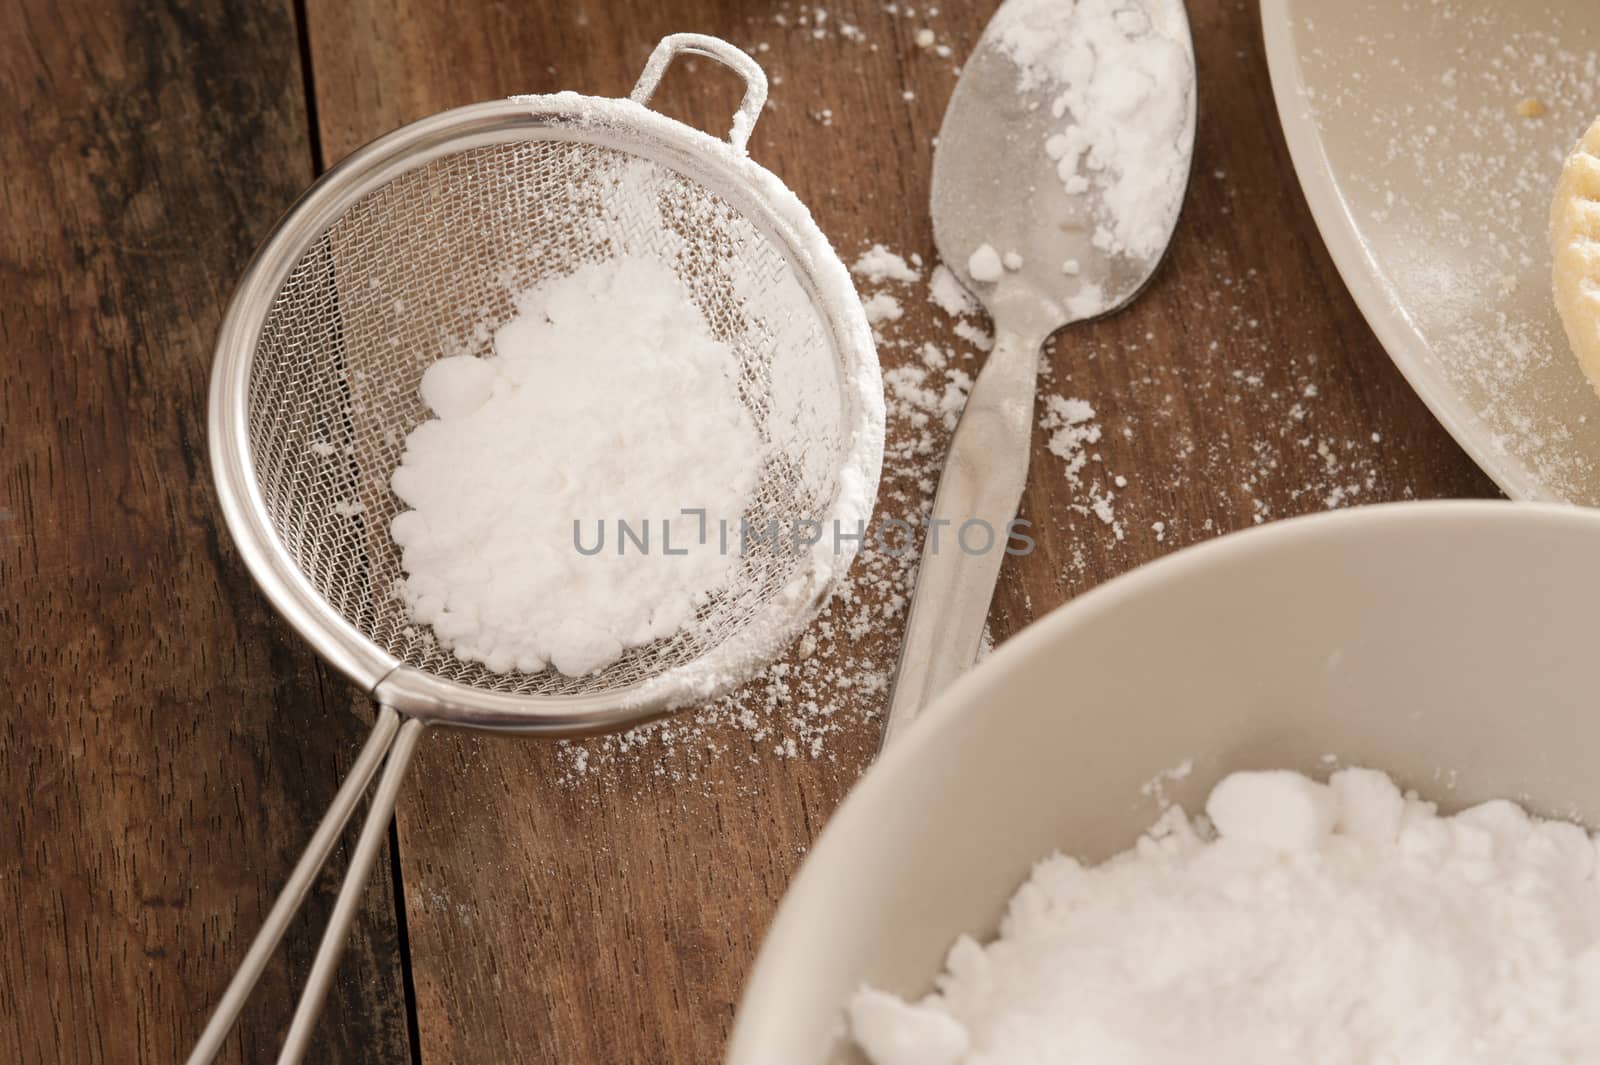 Kitchen sieve filled with icing sugar lying on a wooden kitchen counter alongside a mixing bowl while baking or cooking pastries and food